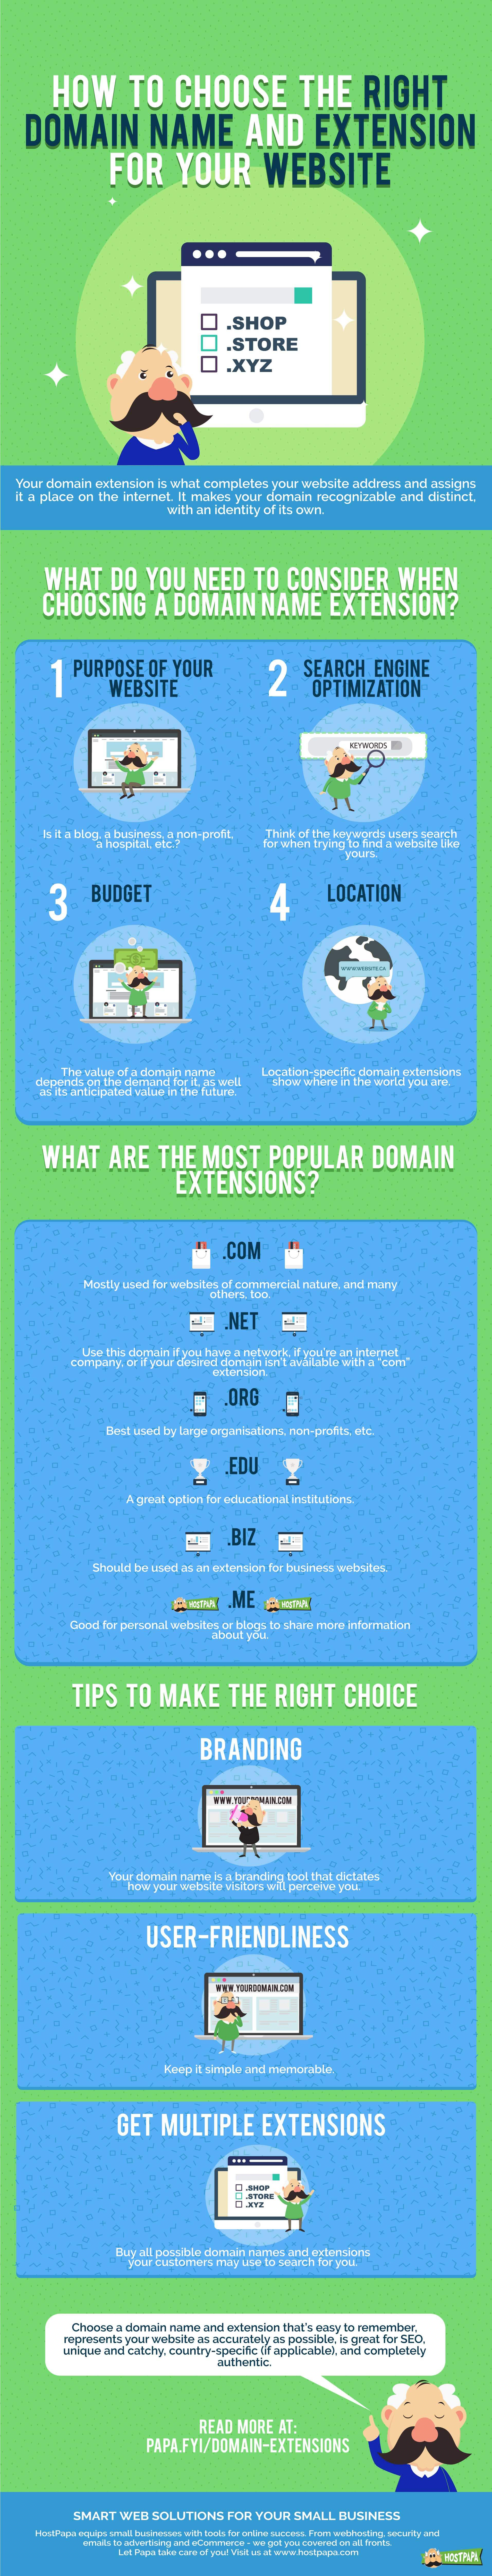 How To Choose The Right Domain Name and Extension For Your Website